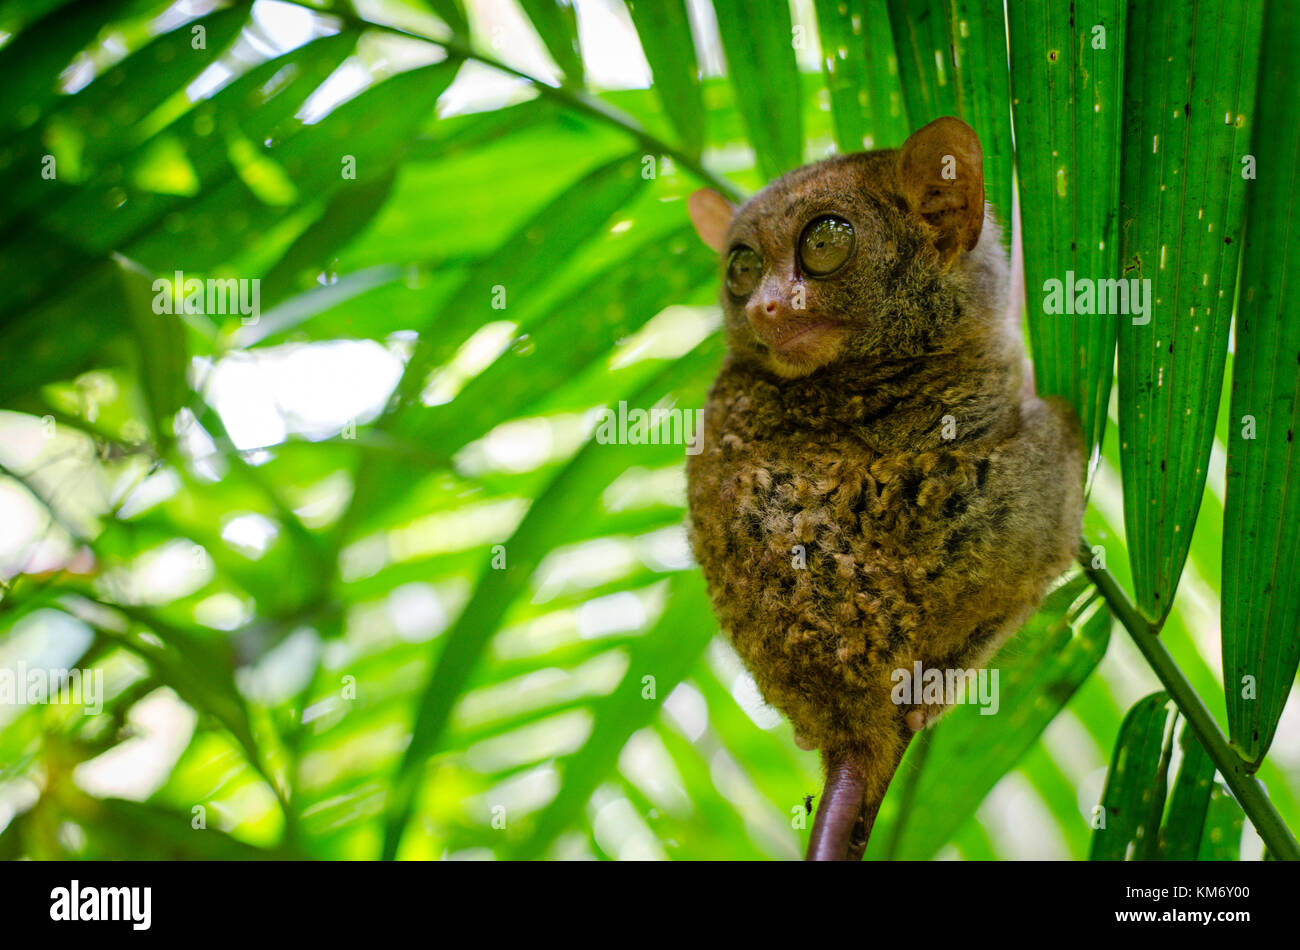 Tarsier monkey Bohol Philippines. Holding on to a branch with the eyes opened on a green background Stock Photo